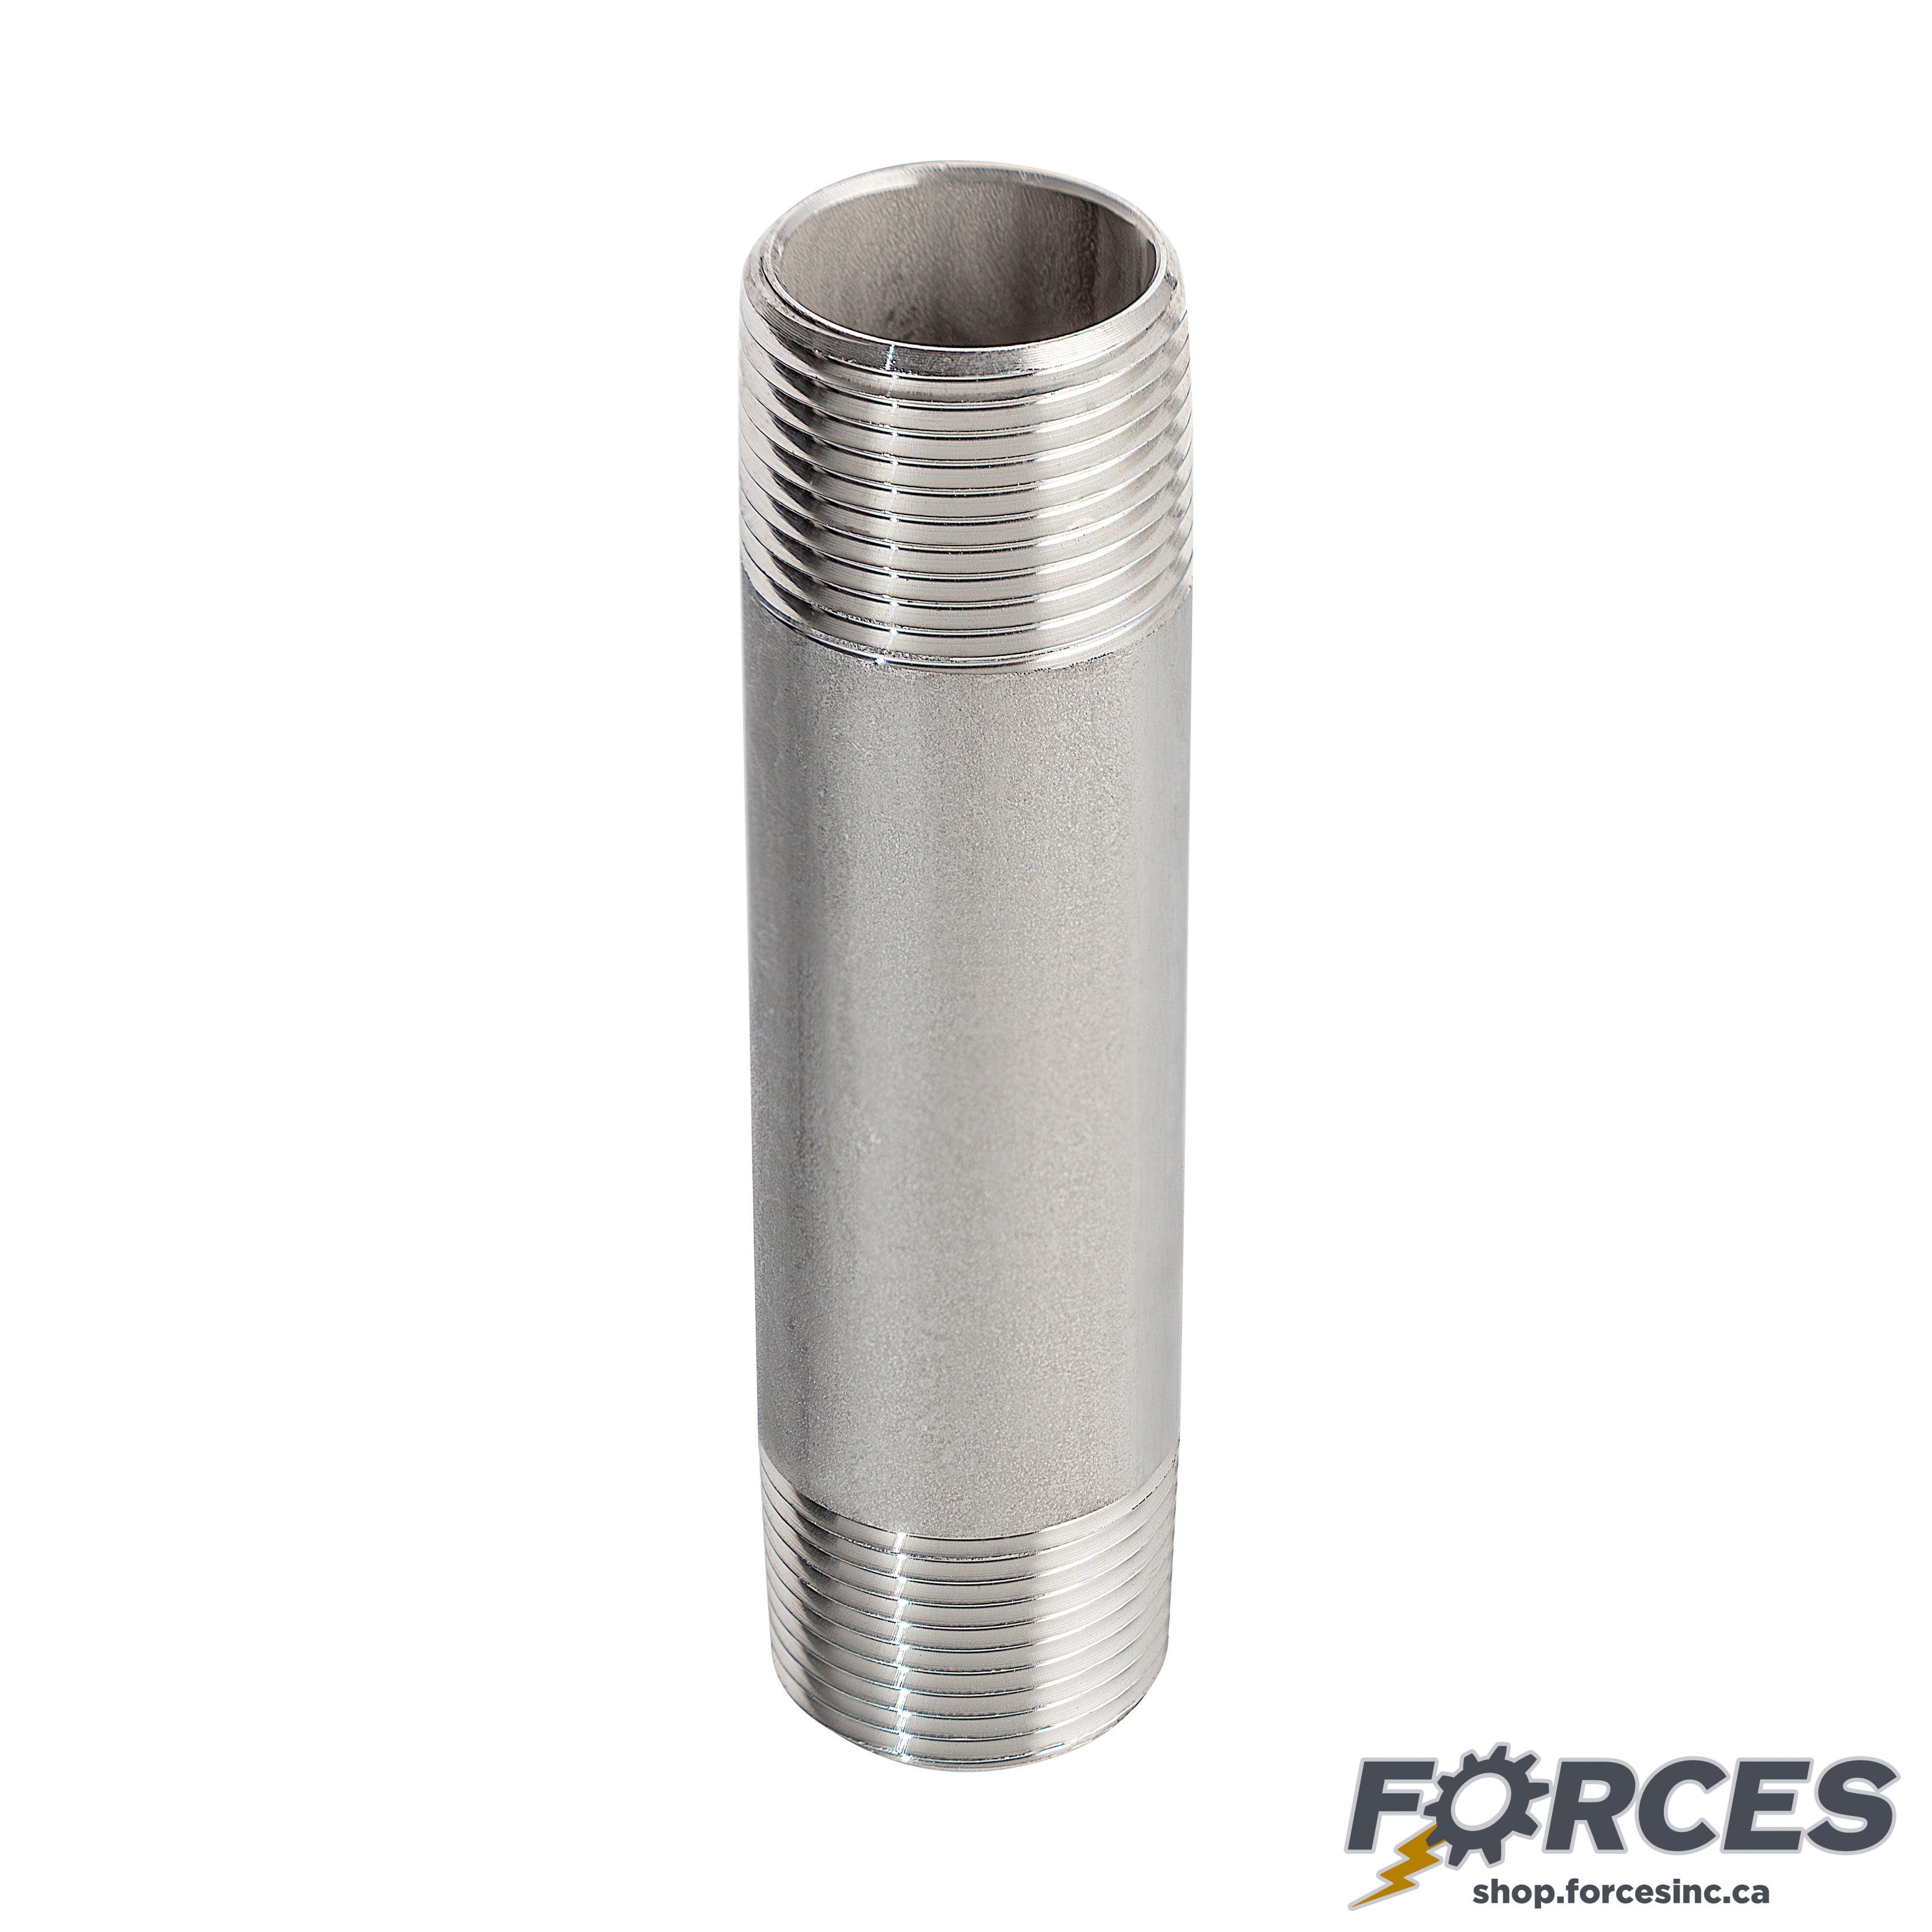 3/8" X 2" Long Nipple - Stainless Steel 316 - Forces Inc